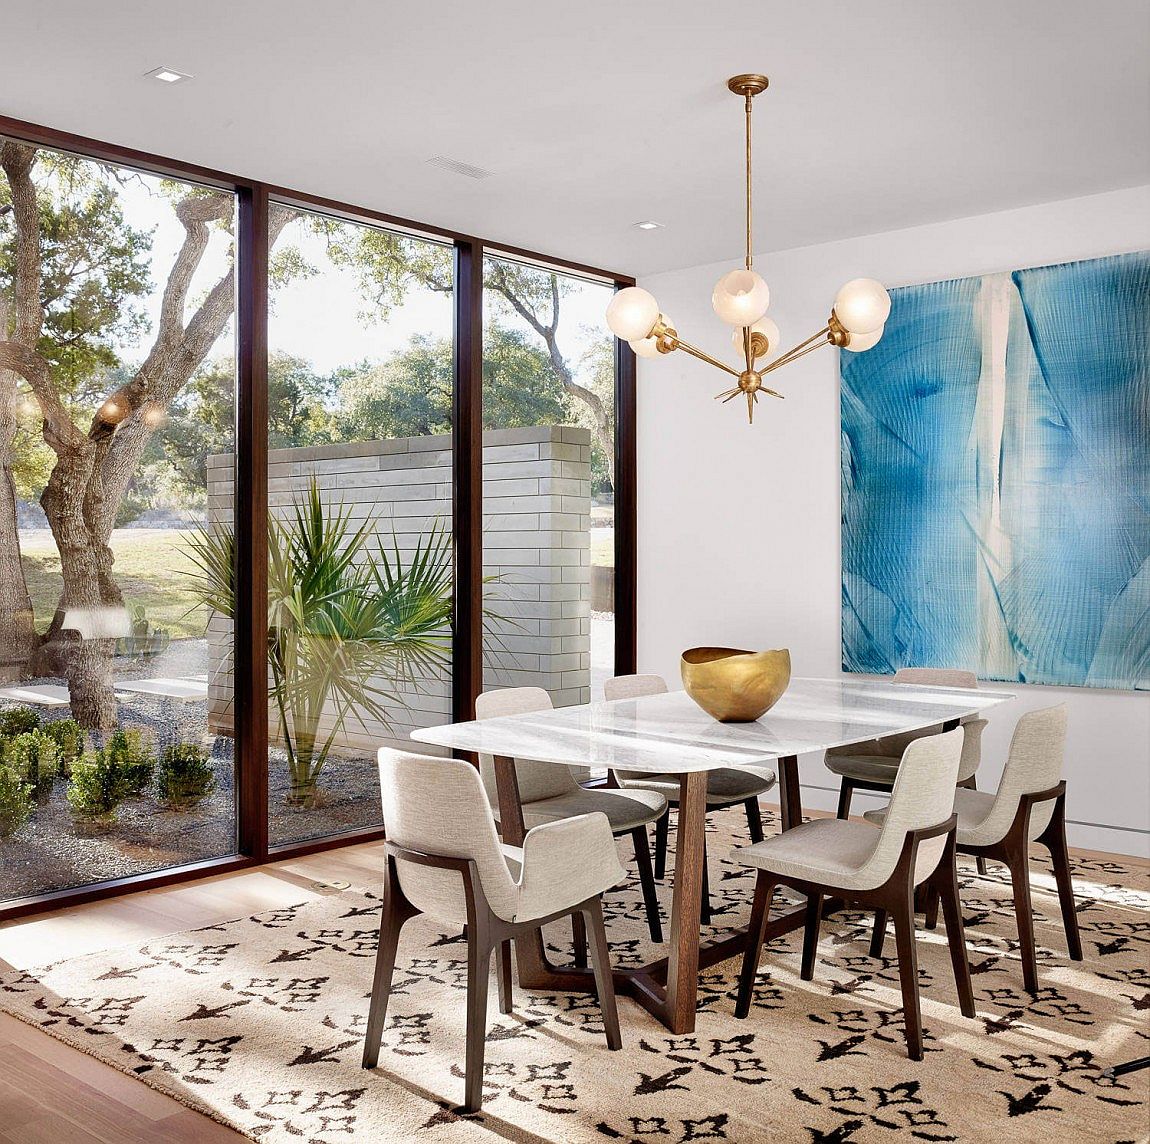 Large glass windows open up the contemporary dining room to the view outside